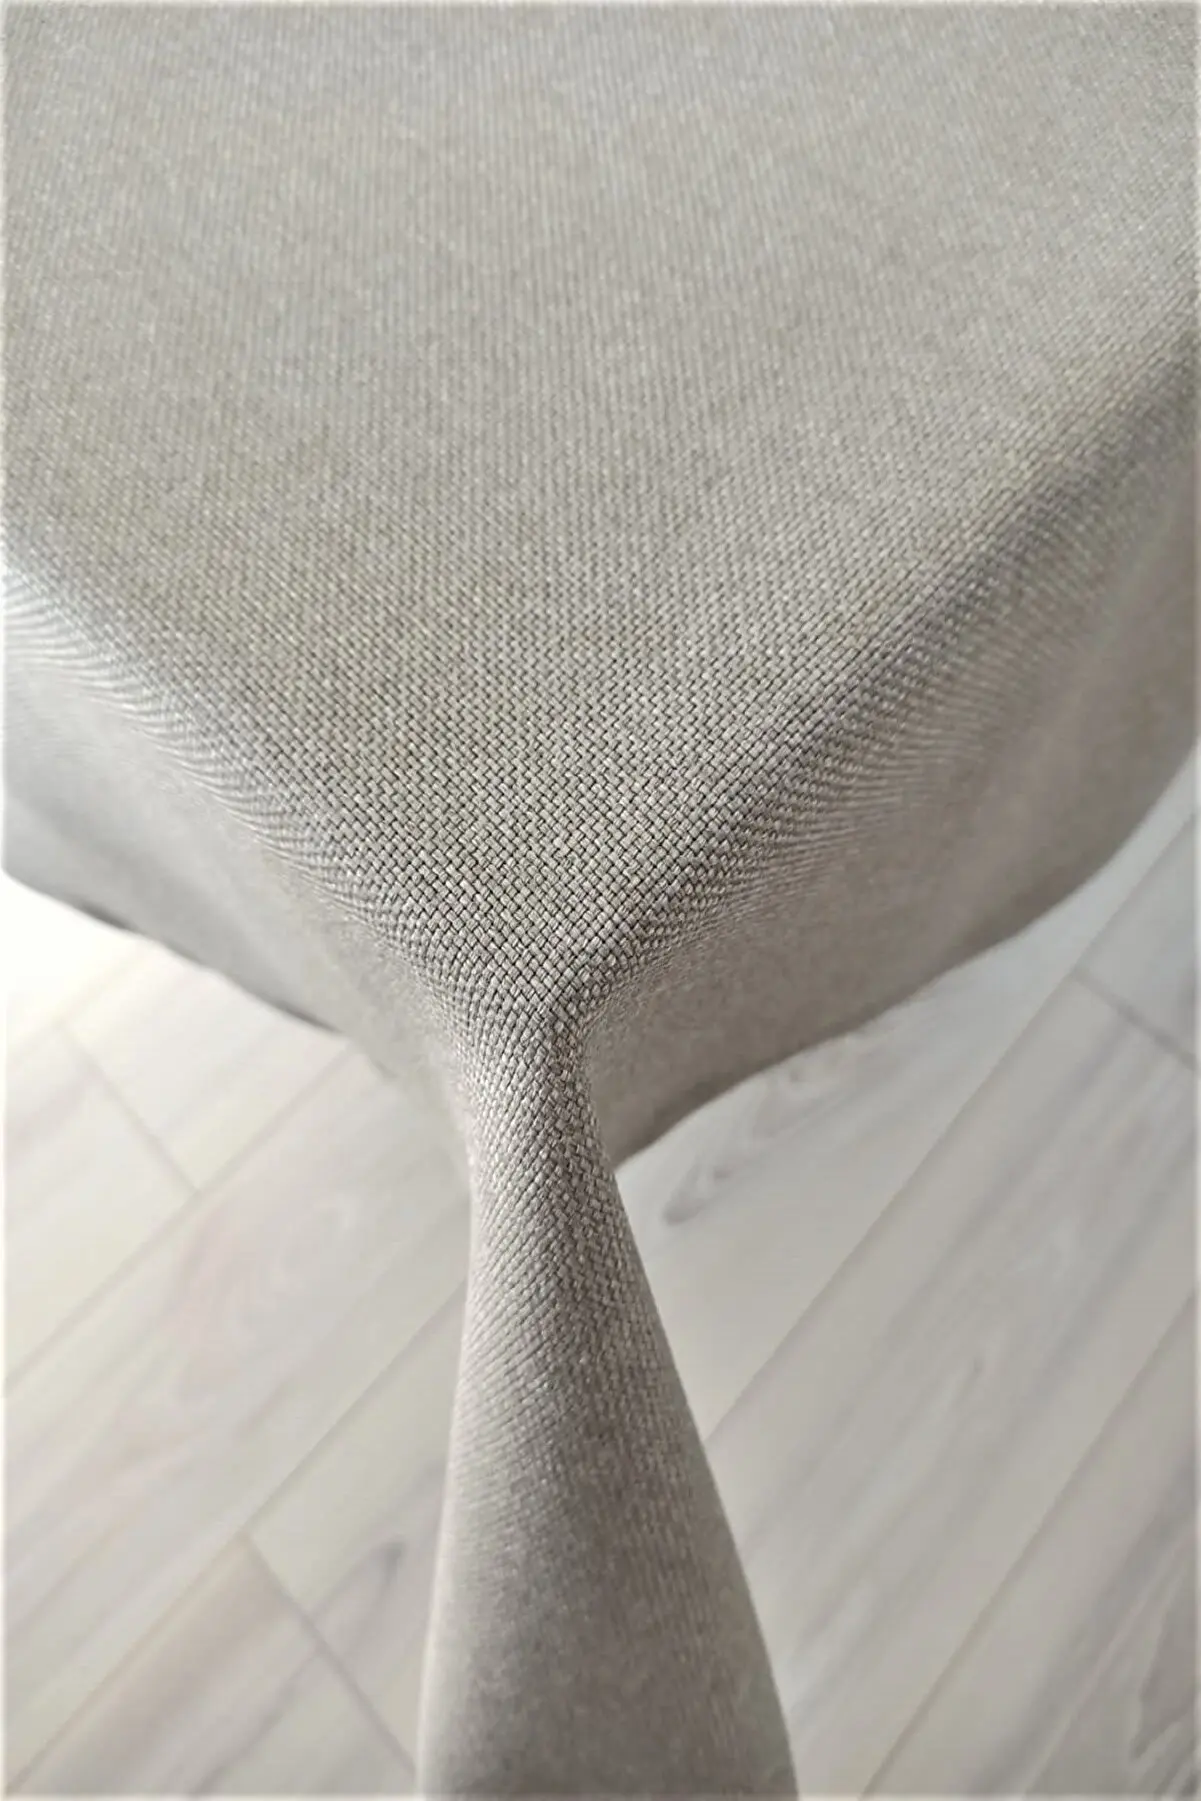 

Linen Look Stain Resistant Cream Table Cloth Wedding, Party,Sofa Cover Turkish Cotton For Rectangle Table